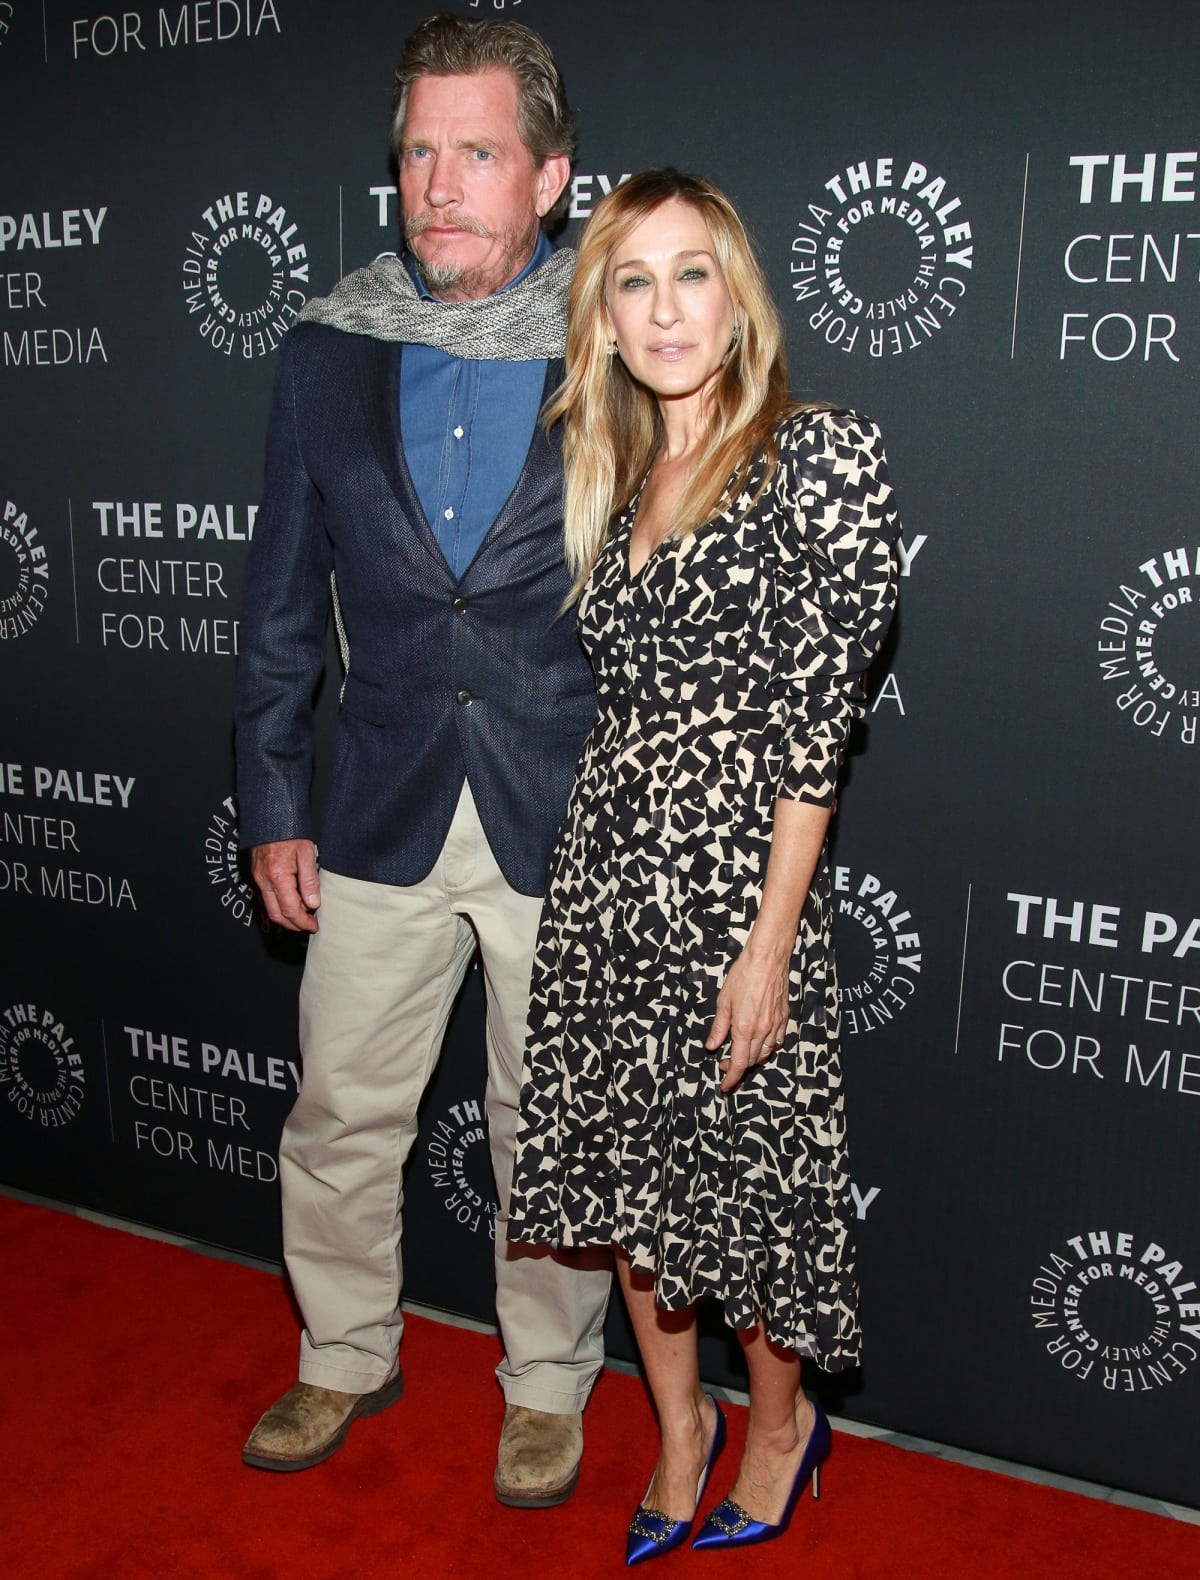 At five feet and 11 ¼ inches, Thomas Haden Church is significantly taller than his petite Divorce co-star Sarah Jessica Parker